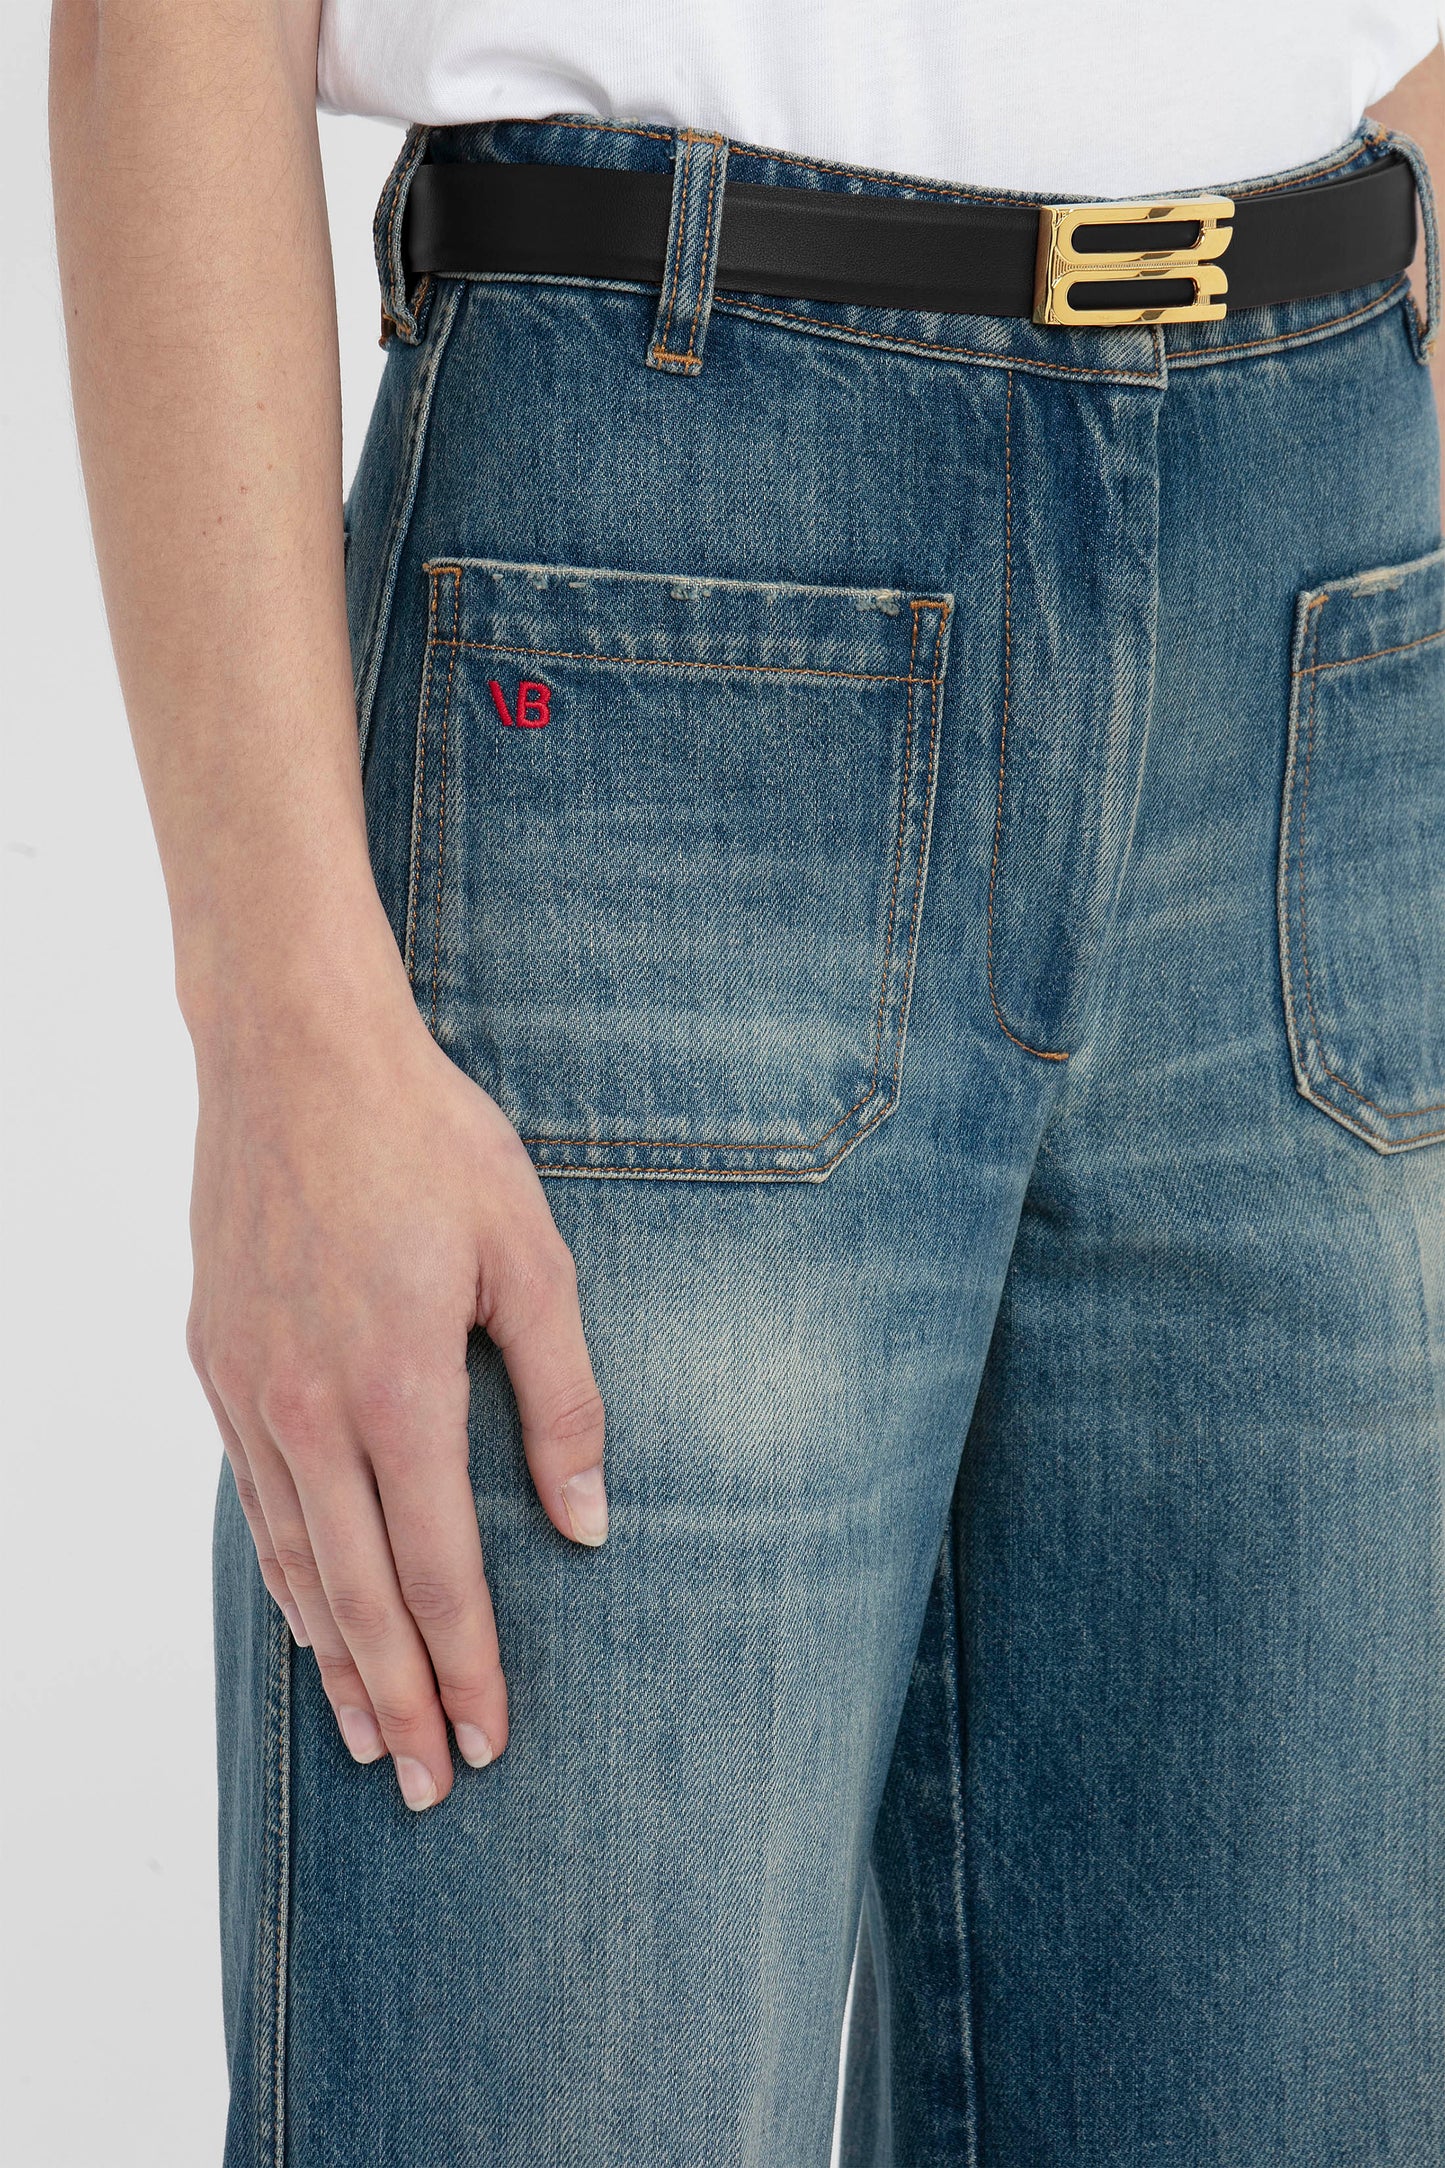 Close-up of a person wearing Victoria Beckham Alina Jean Indigrey Wash blue jeans with a black belt and a red logo on the back pocket, hand resting casually by the side.